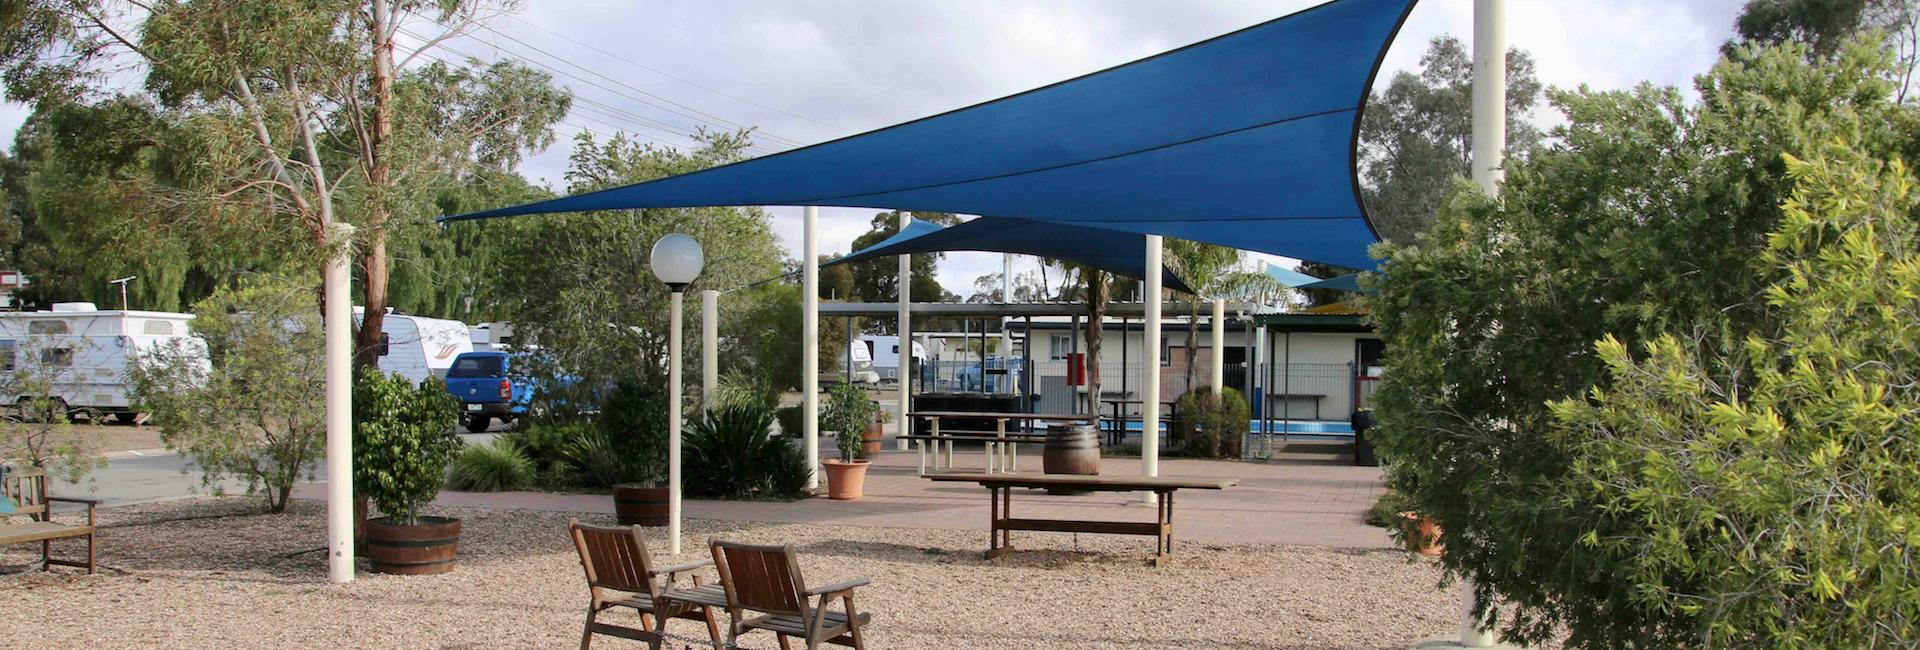 Shaded relaxation area at Broken Hill Tourist Park